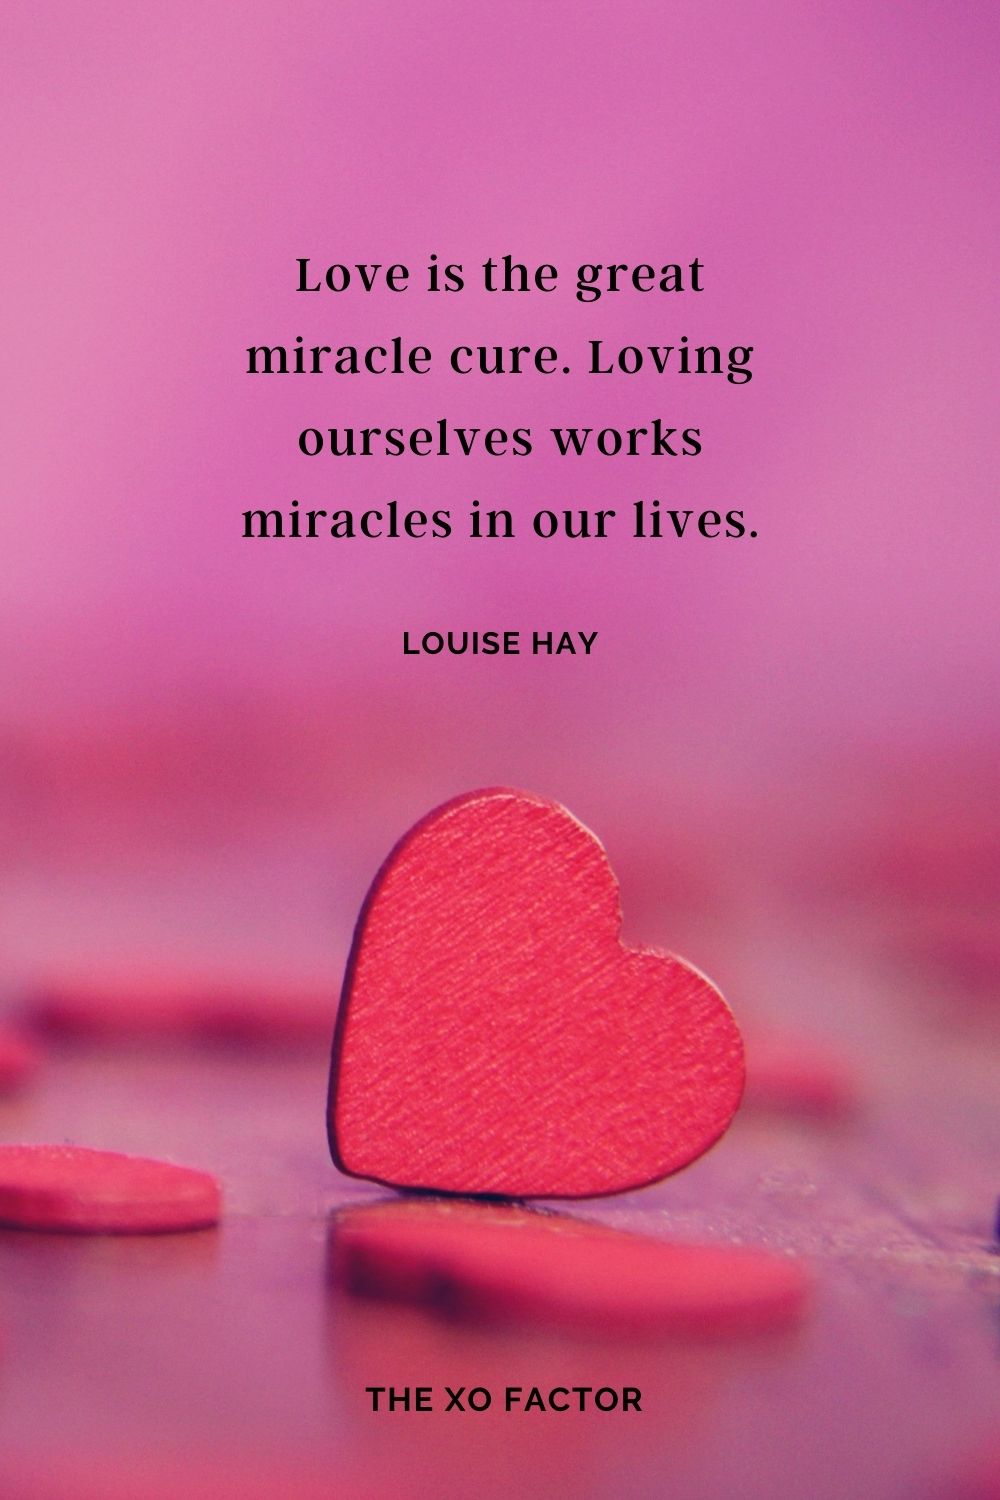 Love is the great miracle cure. Loving ourselves works miracles in our lives. Louise Hay